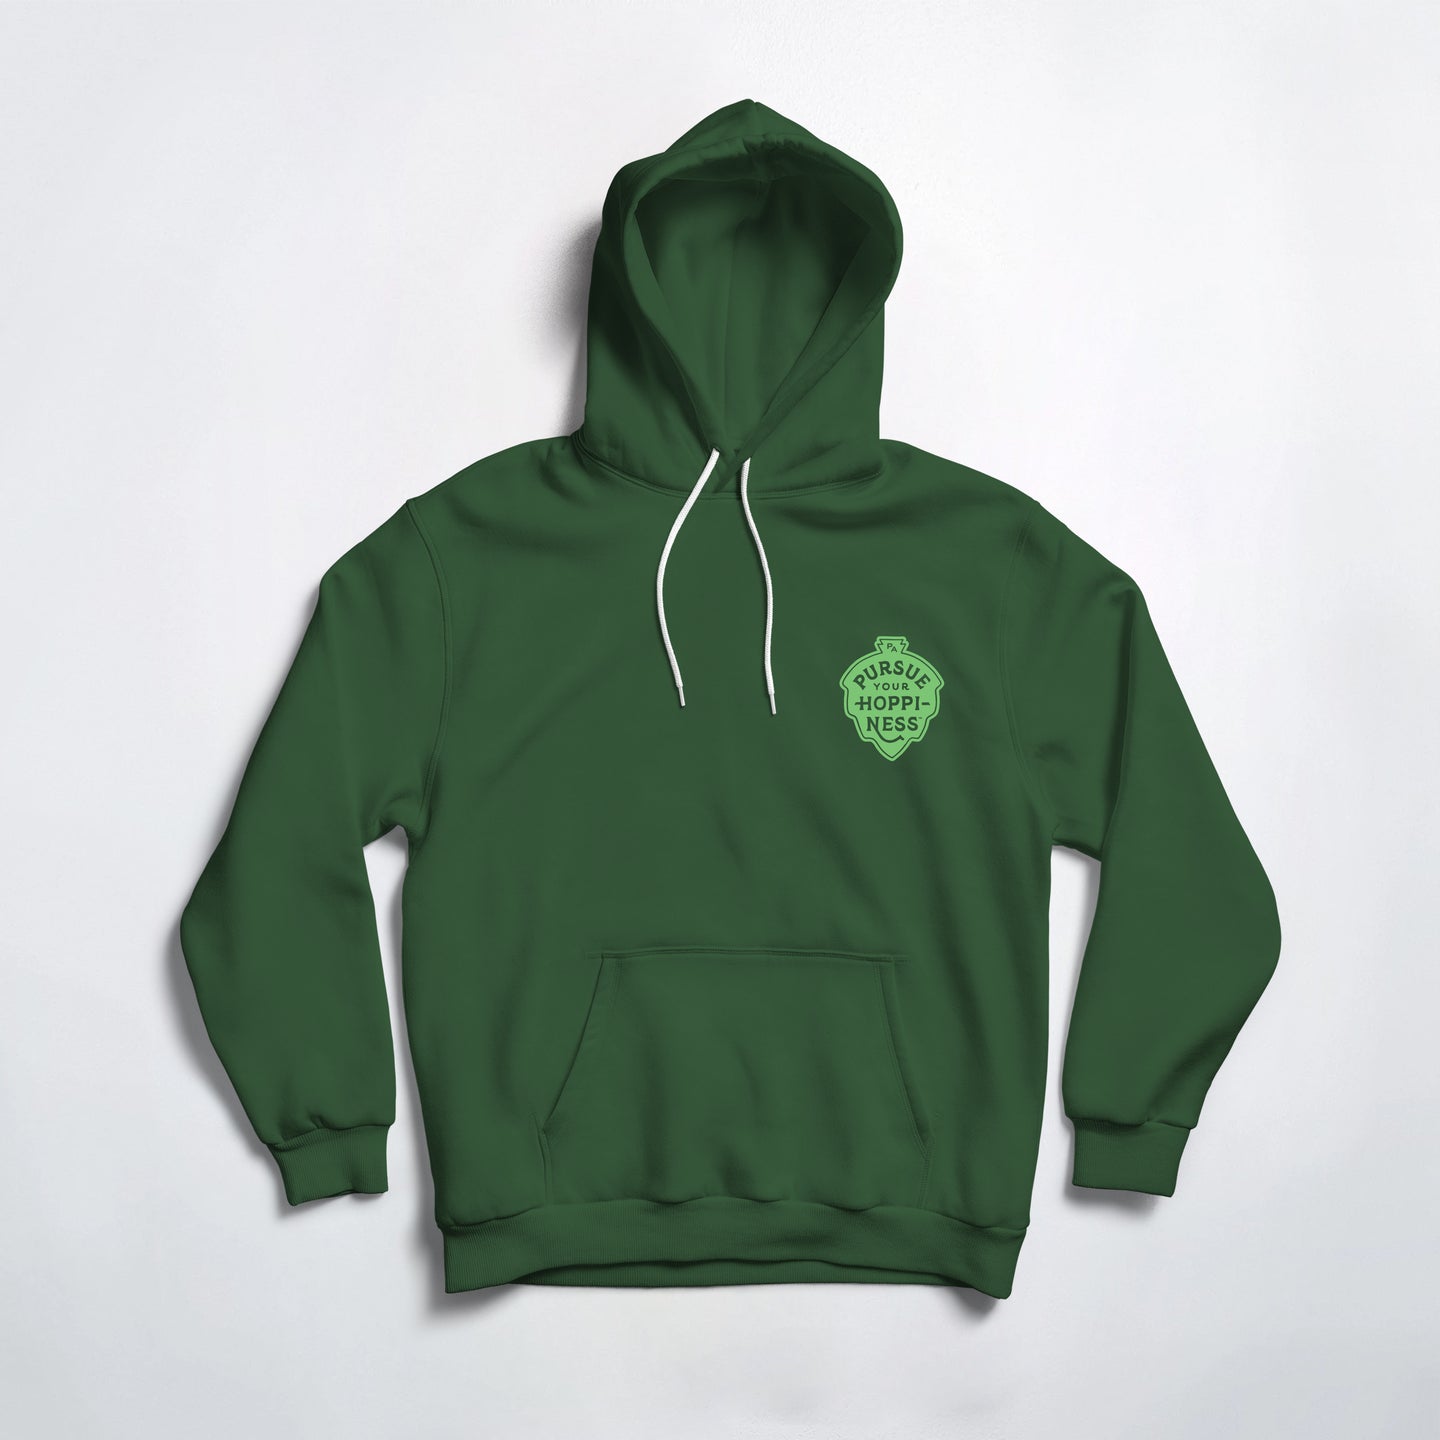 Pursue Your Hoppiness Craft Beer Hoodie